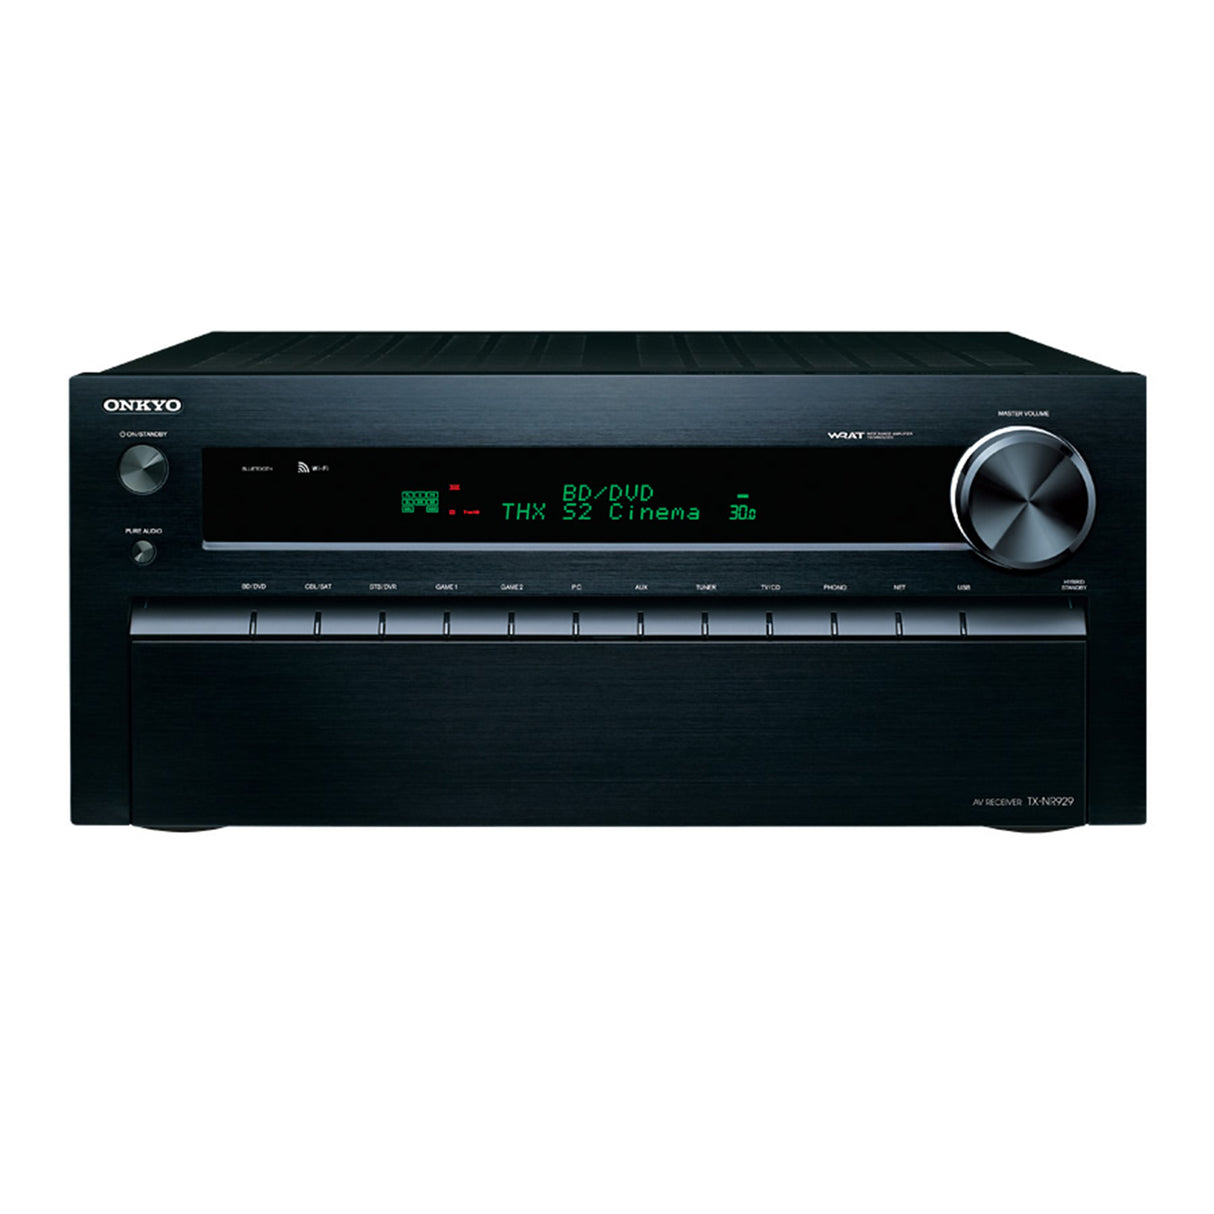 Onkyo TX-NR929 - 9.2 Channel THX Certified Network AV Receiver (Demo Unit / Without Box Unit)